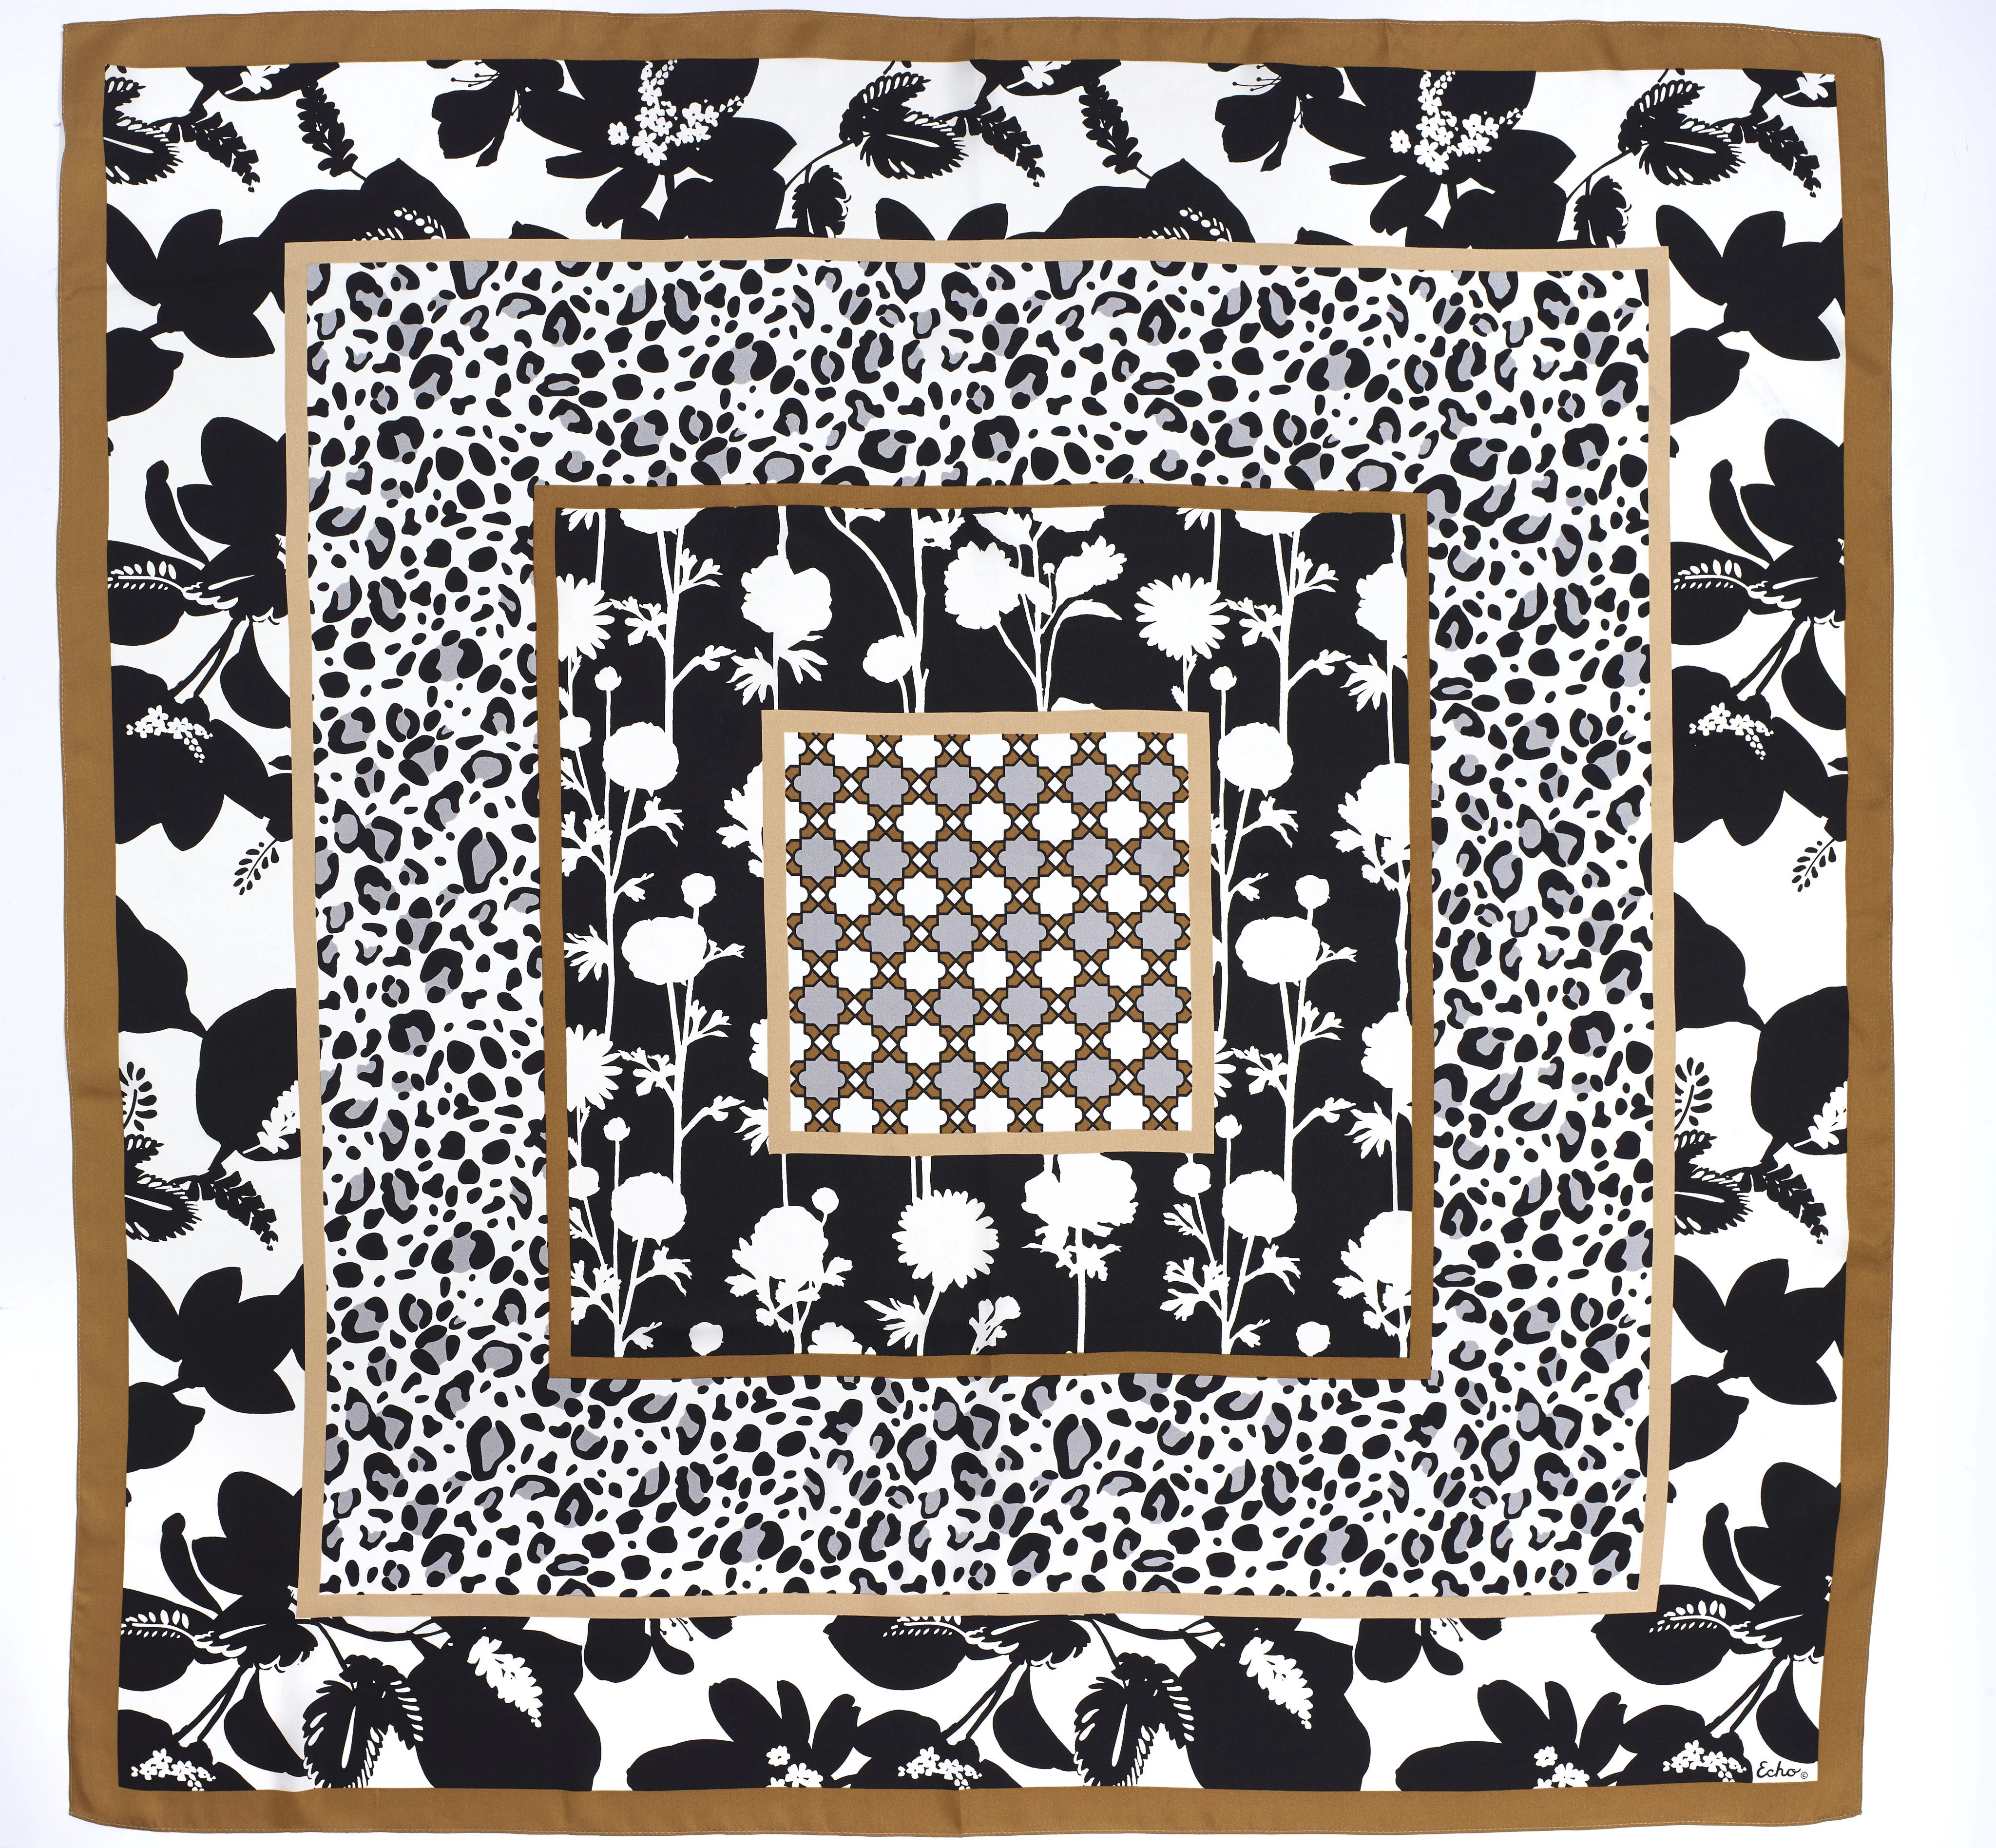 SCARF - FLORAL PATCH SILK SQUARE